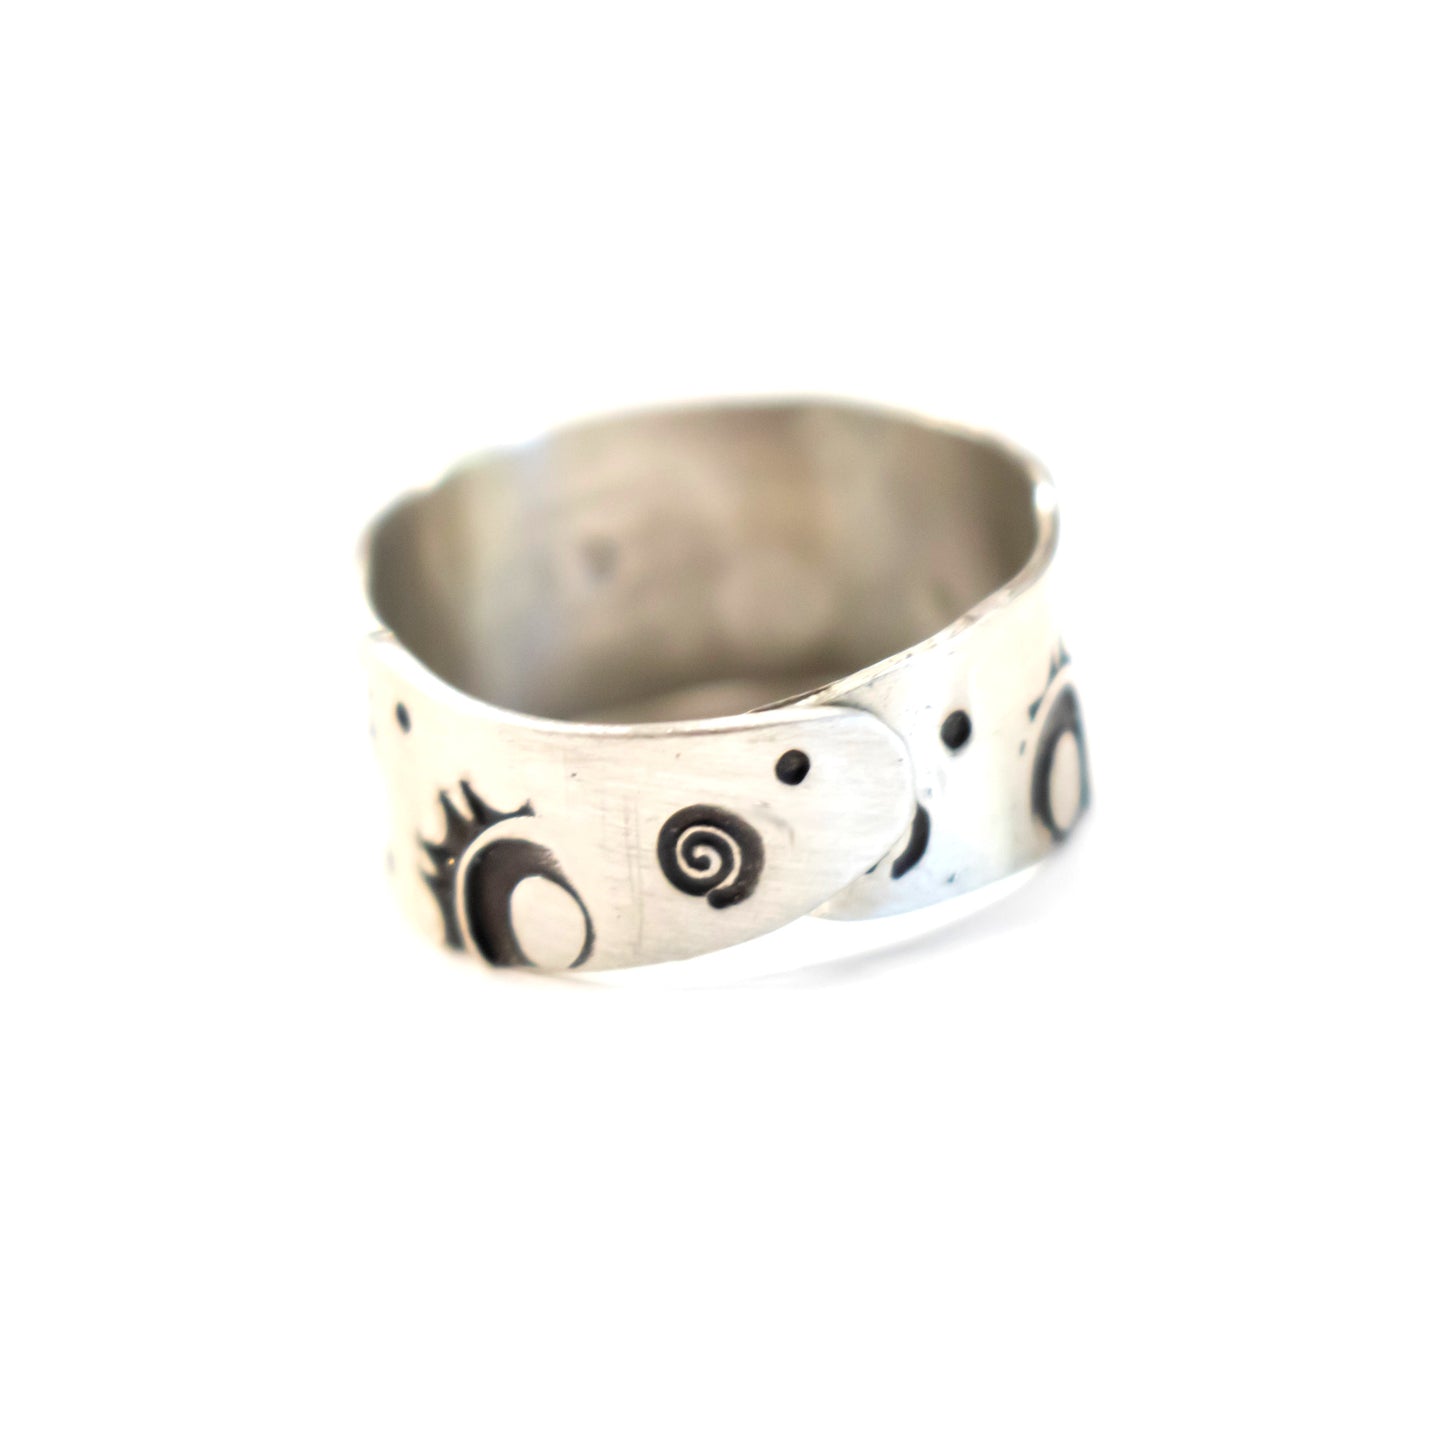 Sterling Silver Adjustable Band Ring-Womens-LittleGreenRoomJewelry-LittleGreenRoomJewelry